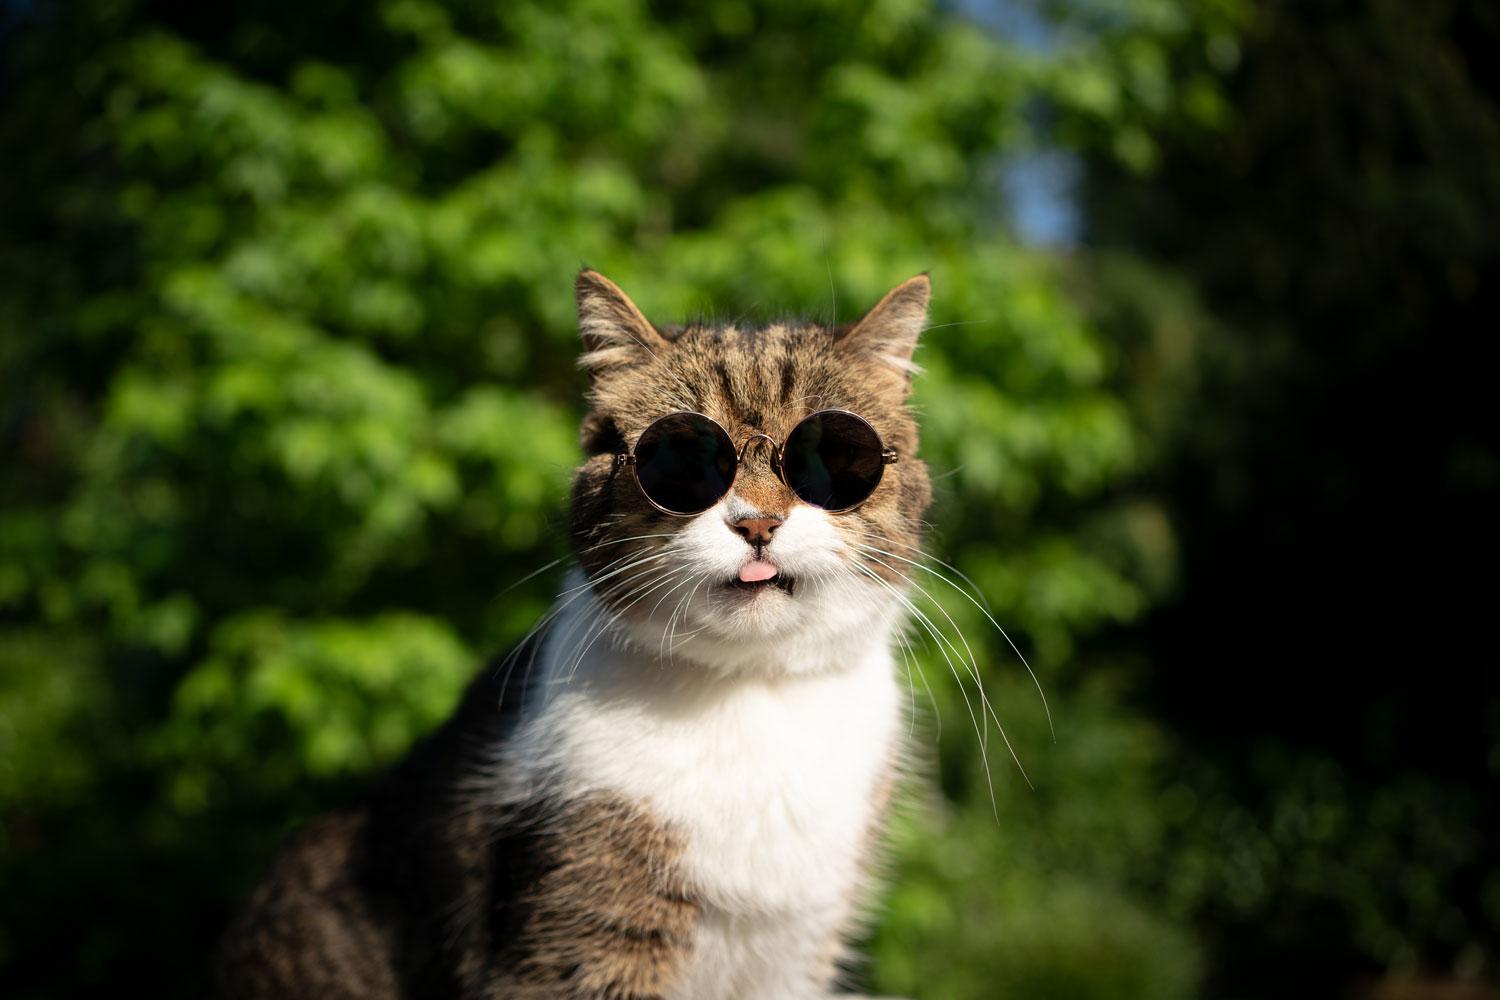 A gorgeous cat wearing round glasses sticking out his tongue